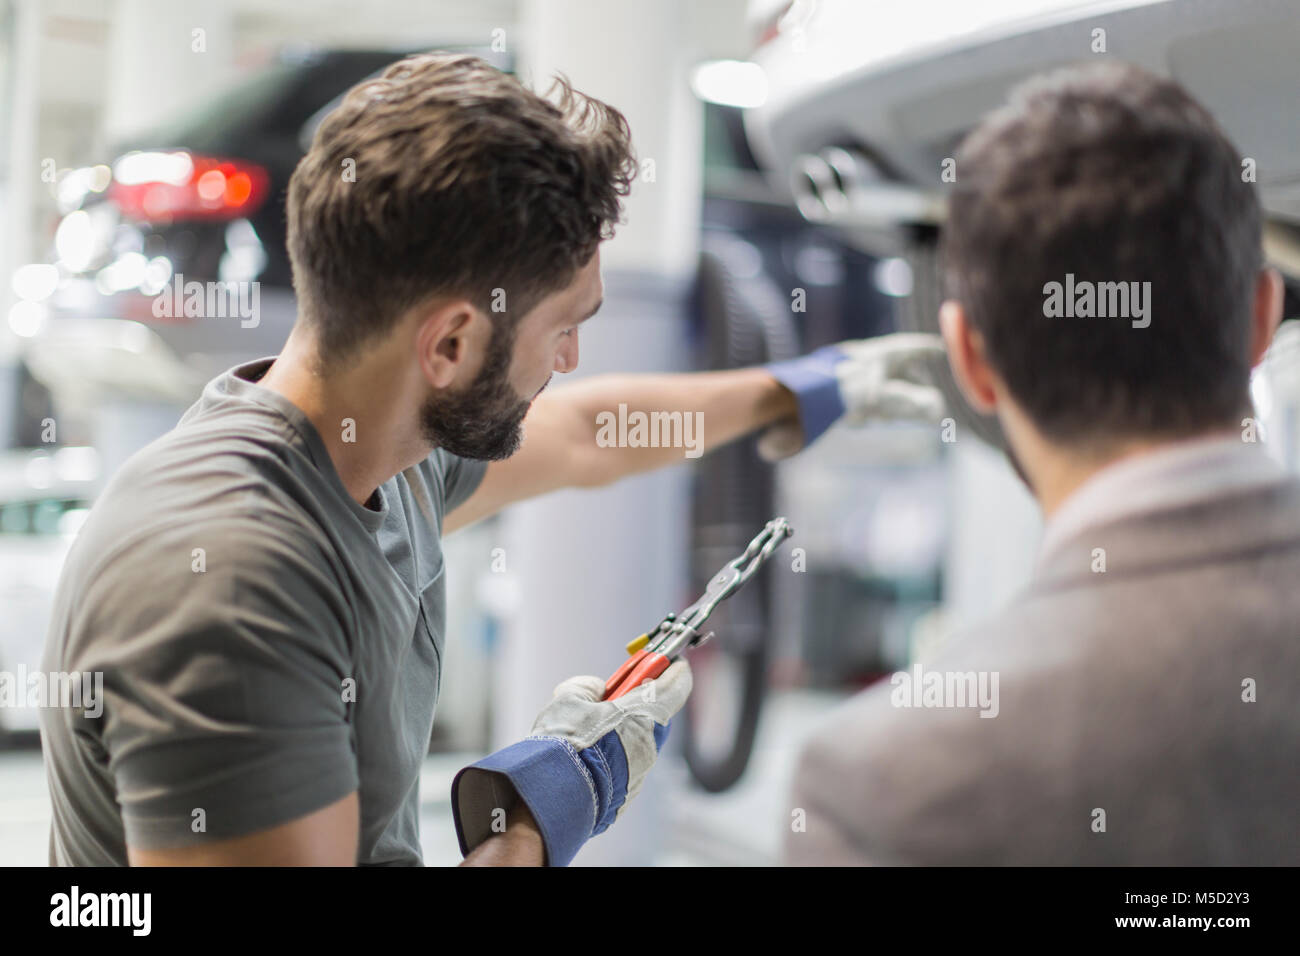 Auto mechanic with tool pointing, explaining to customer in auto repair shop Stock Photo